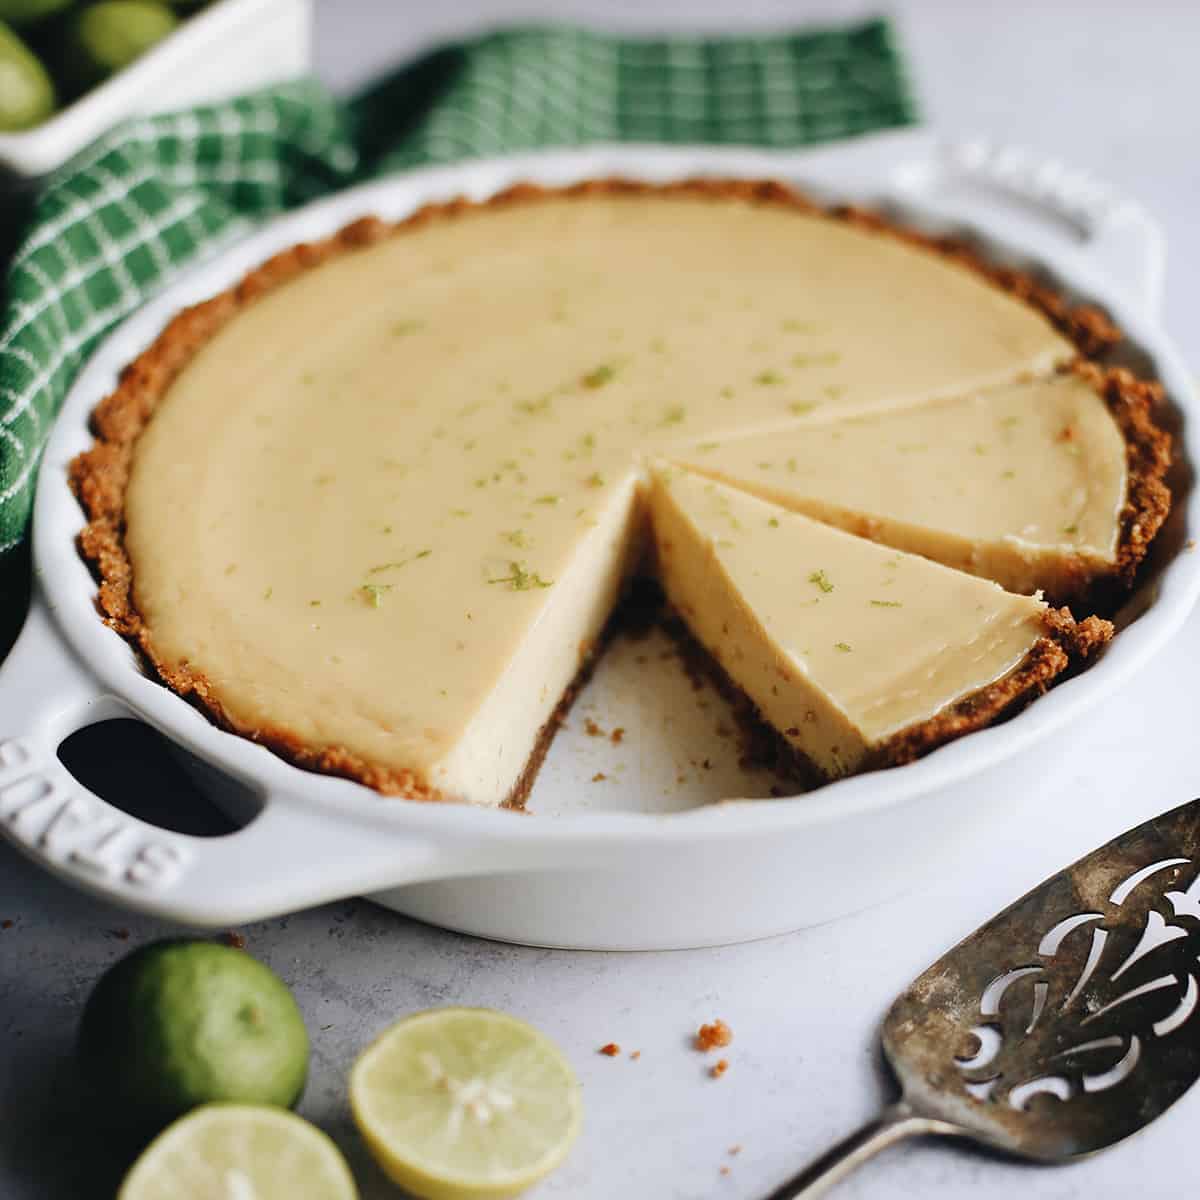 front view of a Key Lime Pie in a pie dish with 2 slices cut out